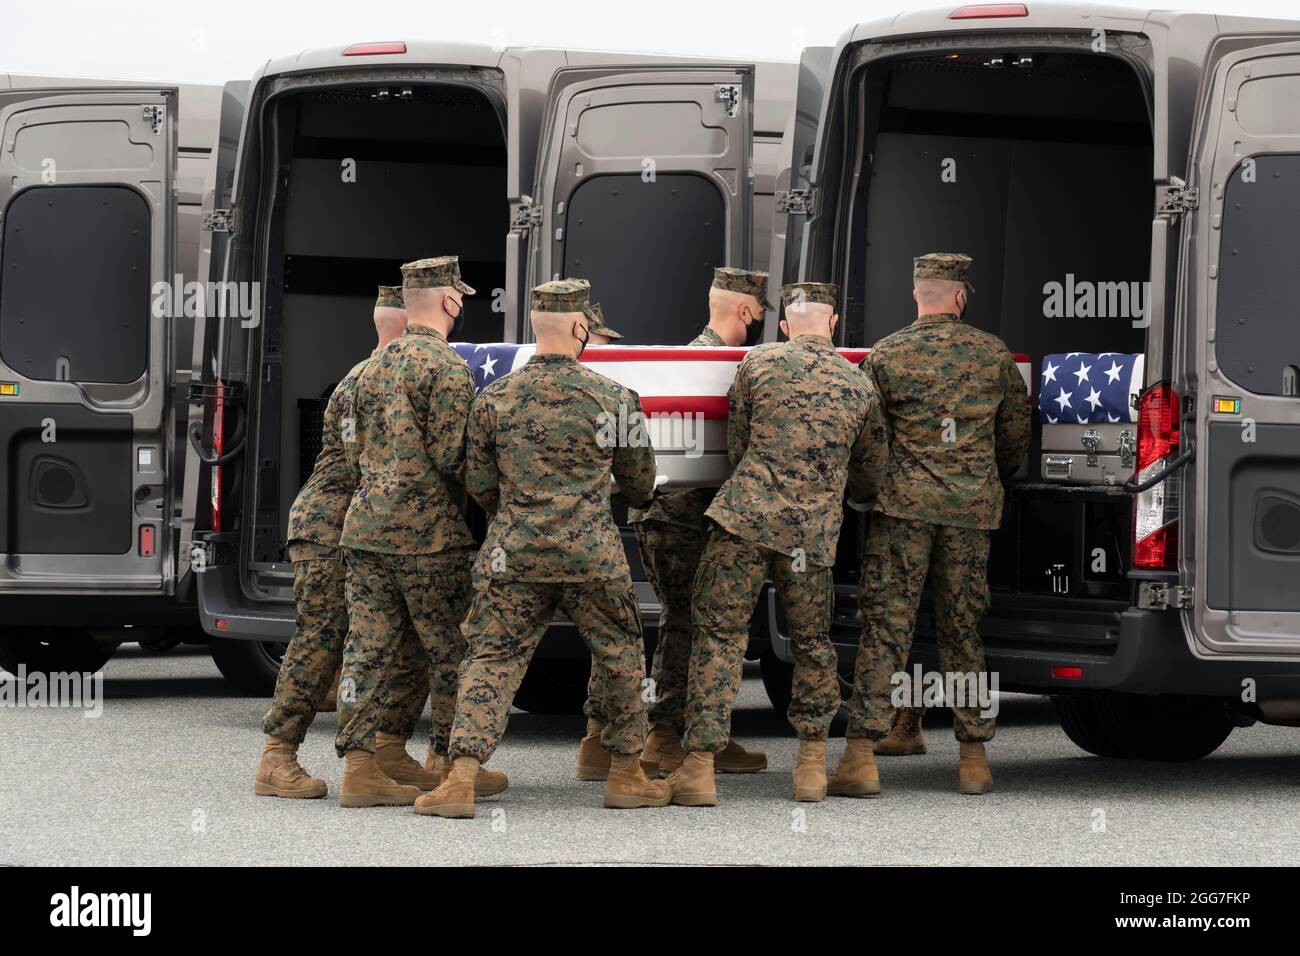 Dover Air Force Base, Delaware, USA. 29th August, 2021. A U.S. Marine Corps carry team transfers the remains of Marine Corps Staff Sgt. Darin T. Hoover of Salt Lake, Utah, August 29, 2021 at Dover Air Force Base, Delaware. Hoover was assigned to 2nd Battalion, 1st Marine Regiment, 1st Marine Division, I Marine Expeditionary Force, Camp Pendleton, California. (U.S. Air Force photo by Jason Minto) Credit: Jeremy Hogan/Alamy Live News Credit: Jeremy Hogan/Alamy Live News Stock Photo